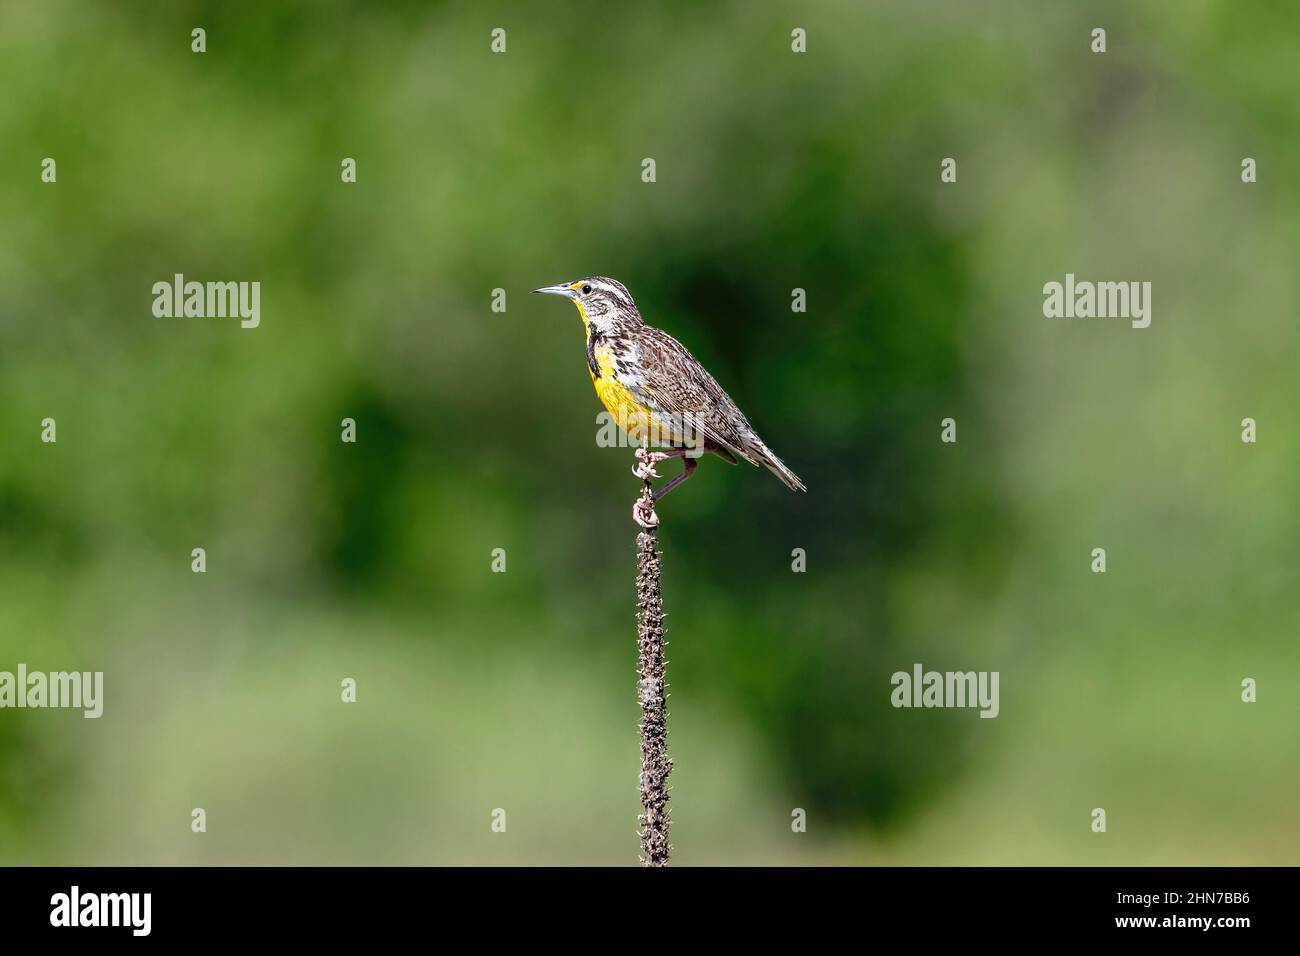 A Western Meadowlark sits atop a thin mullein stalk, with a distant green shrubbery background. Stock Photo